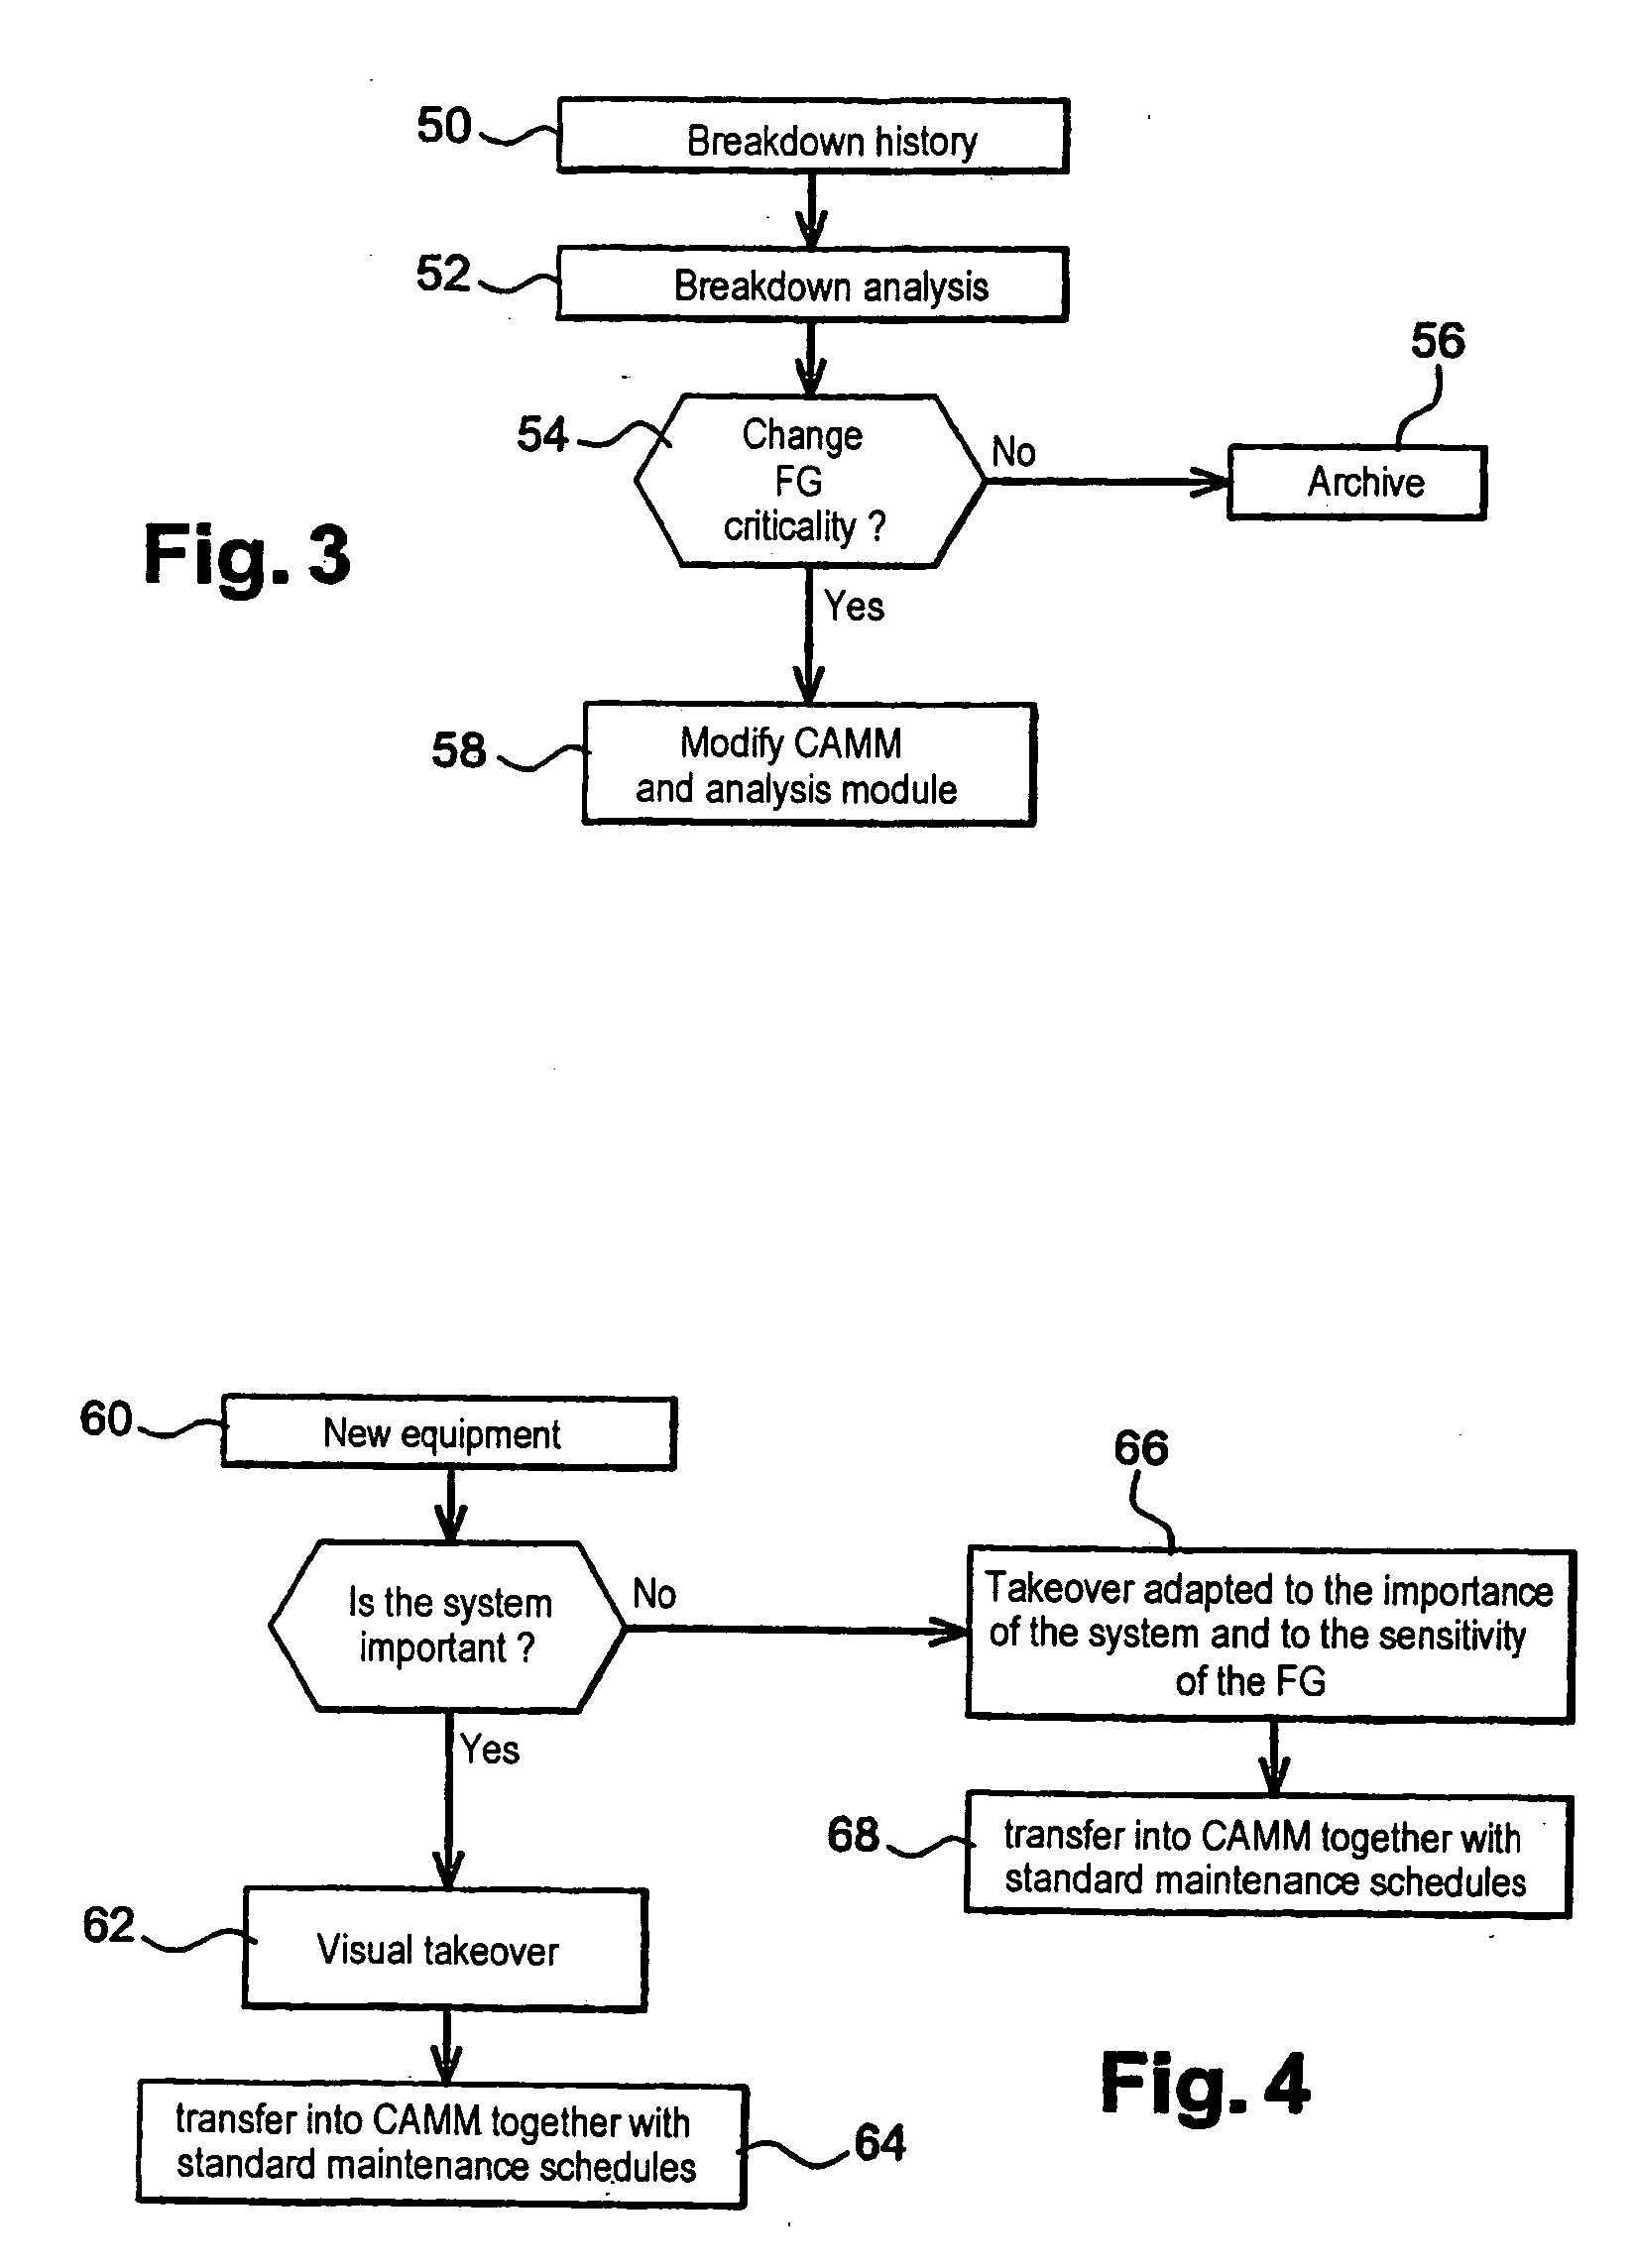 System for taking over and operating services and installations at a site